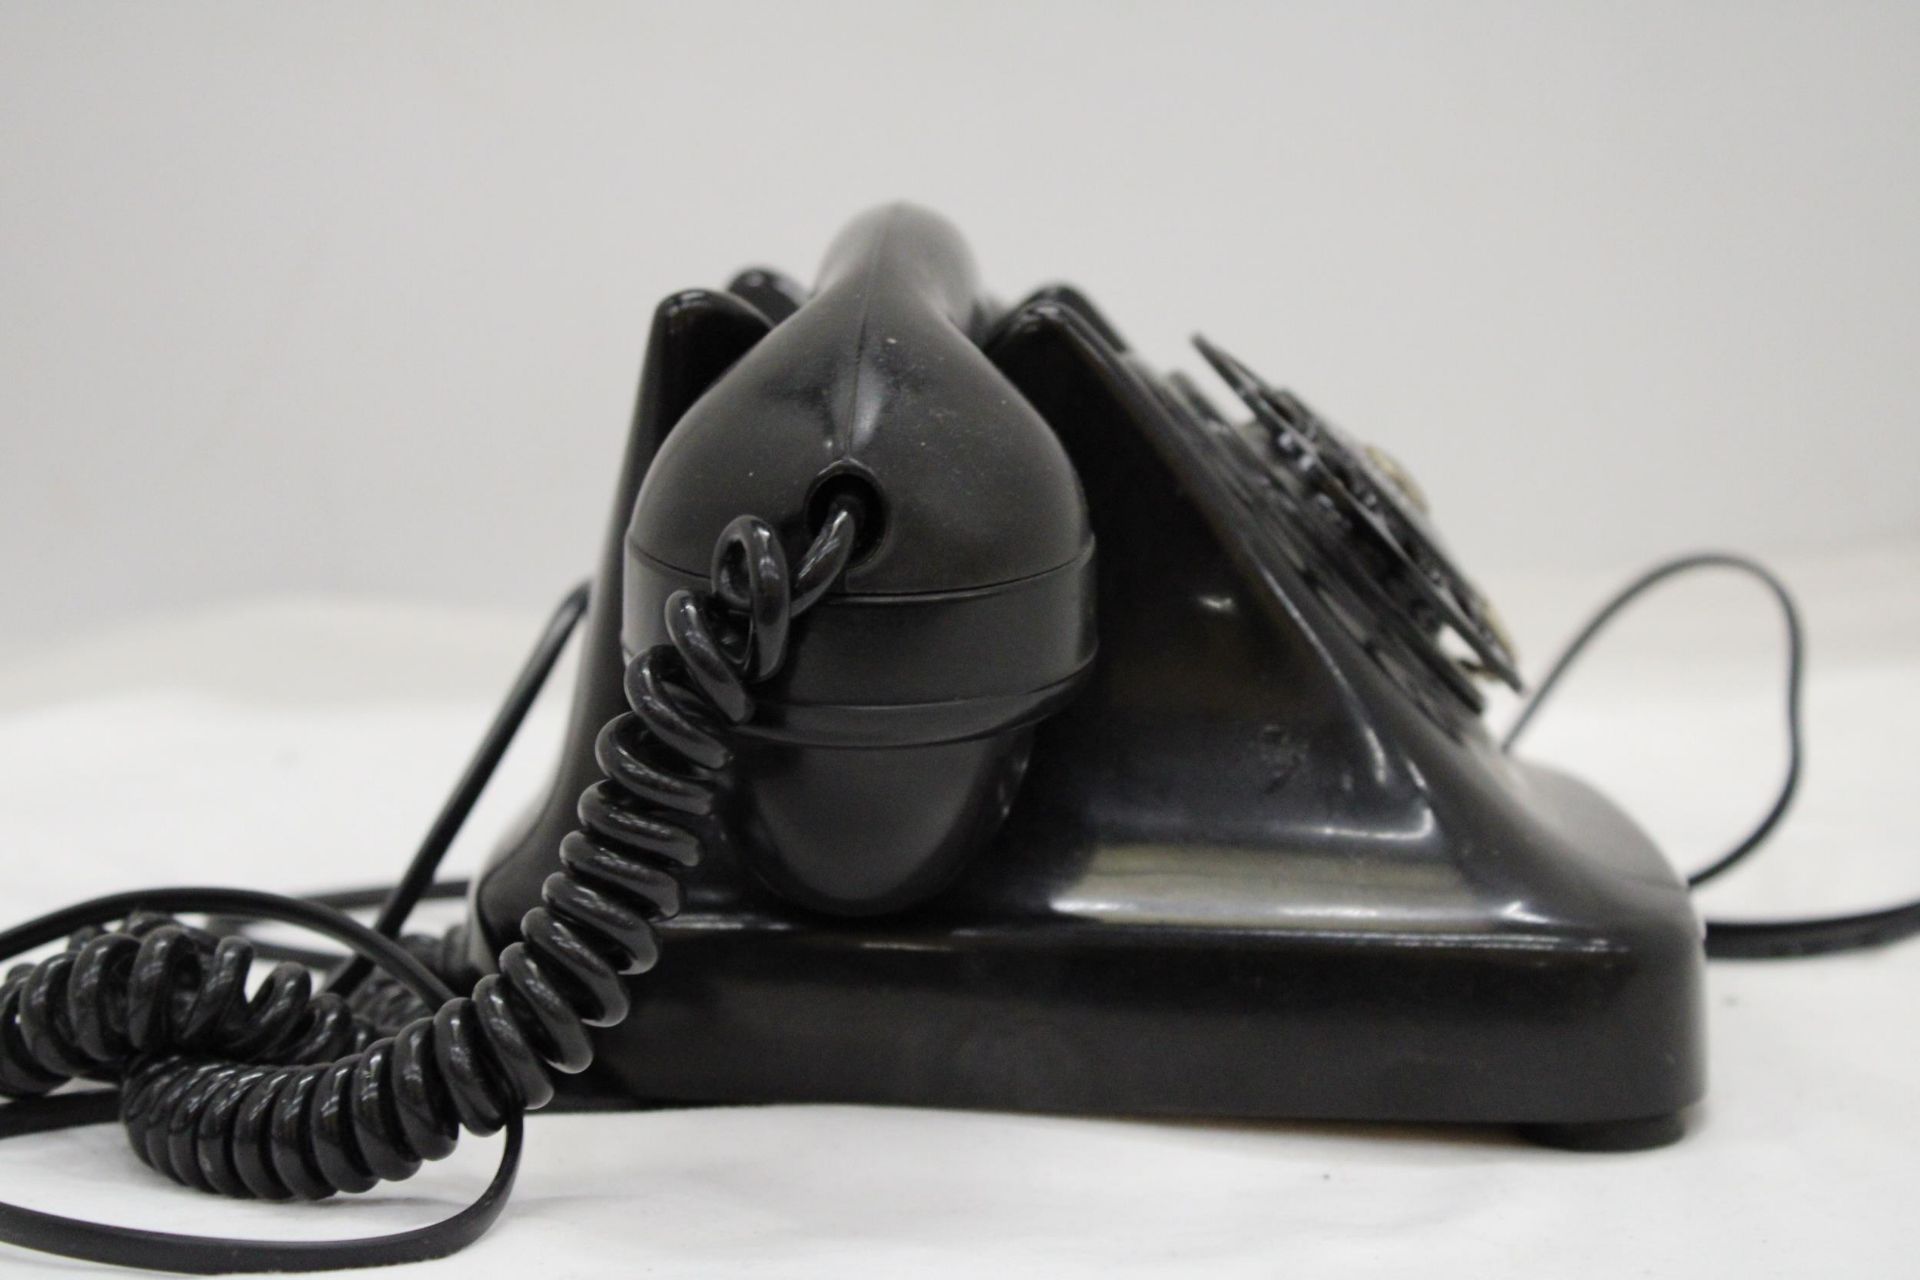 A VERY HEAVY VINTAGE TERRESTIAL TELEPHONE - Image 3 of 5